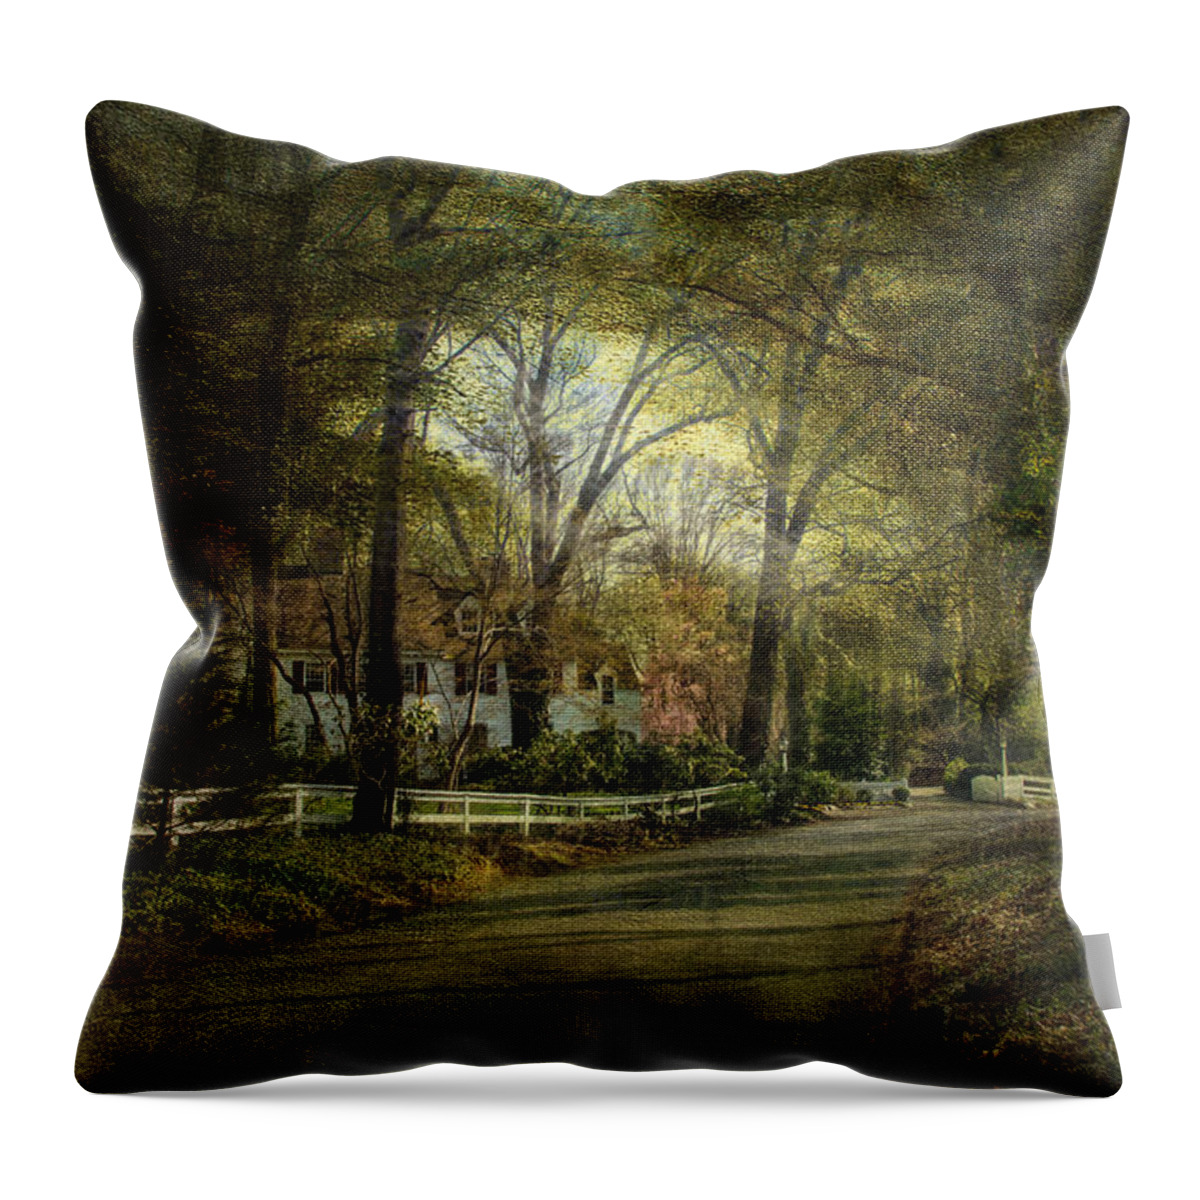 Home Throw Pillow featuring the photograph Take me Home by John Rivera